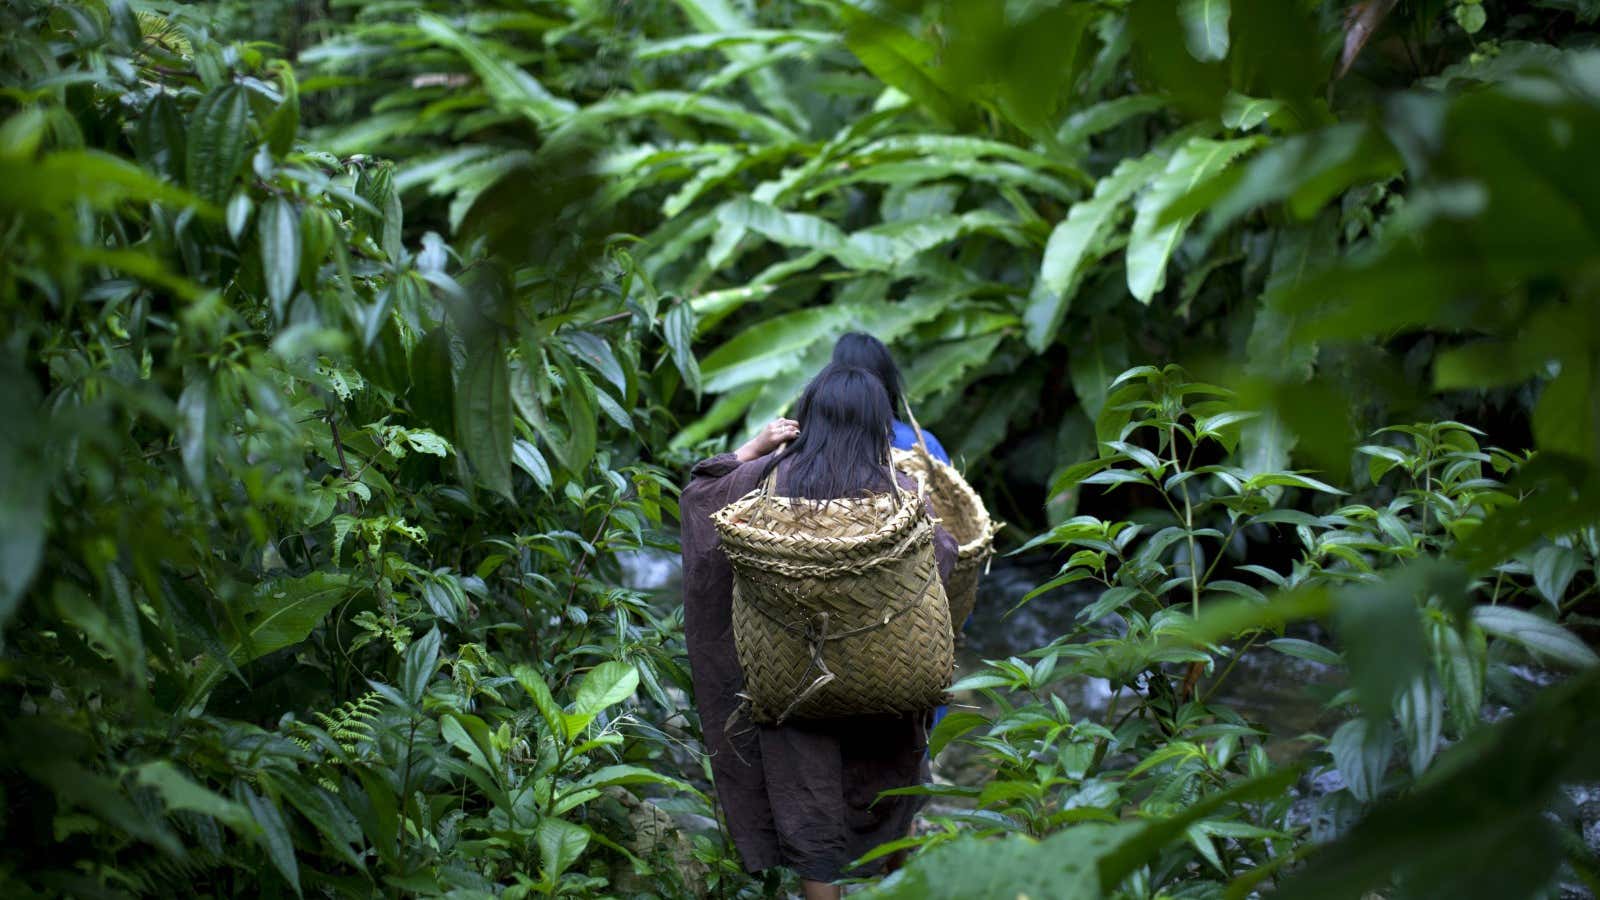 Preserving forest in Peru is one project’s aim.